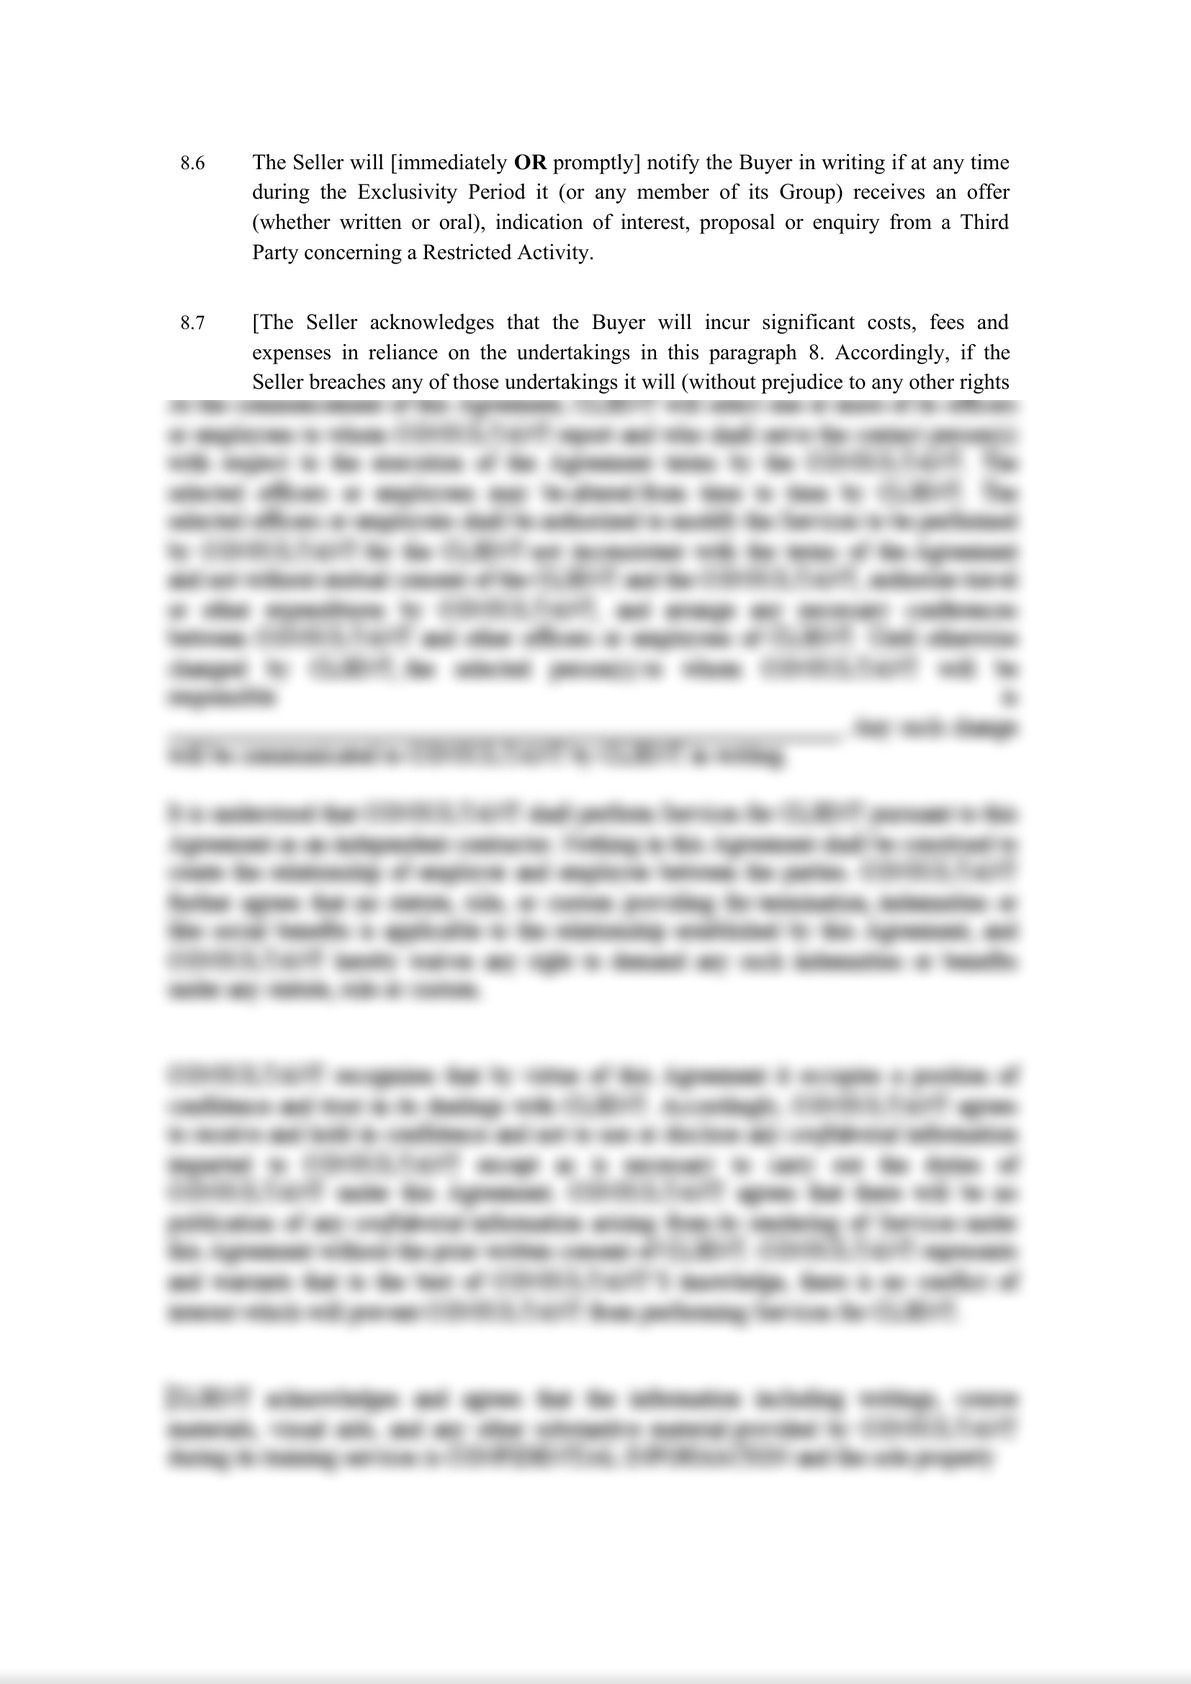 Letter of Intent-International Acquisition (M&A)-9